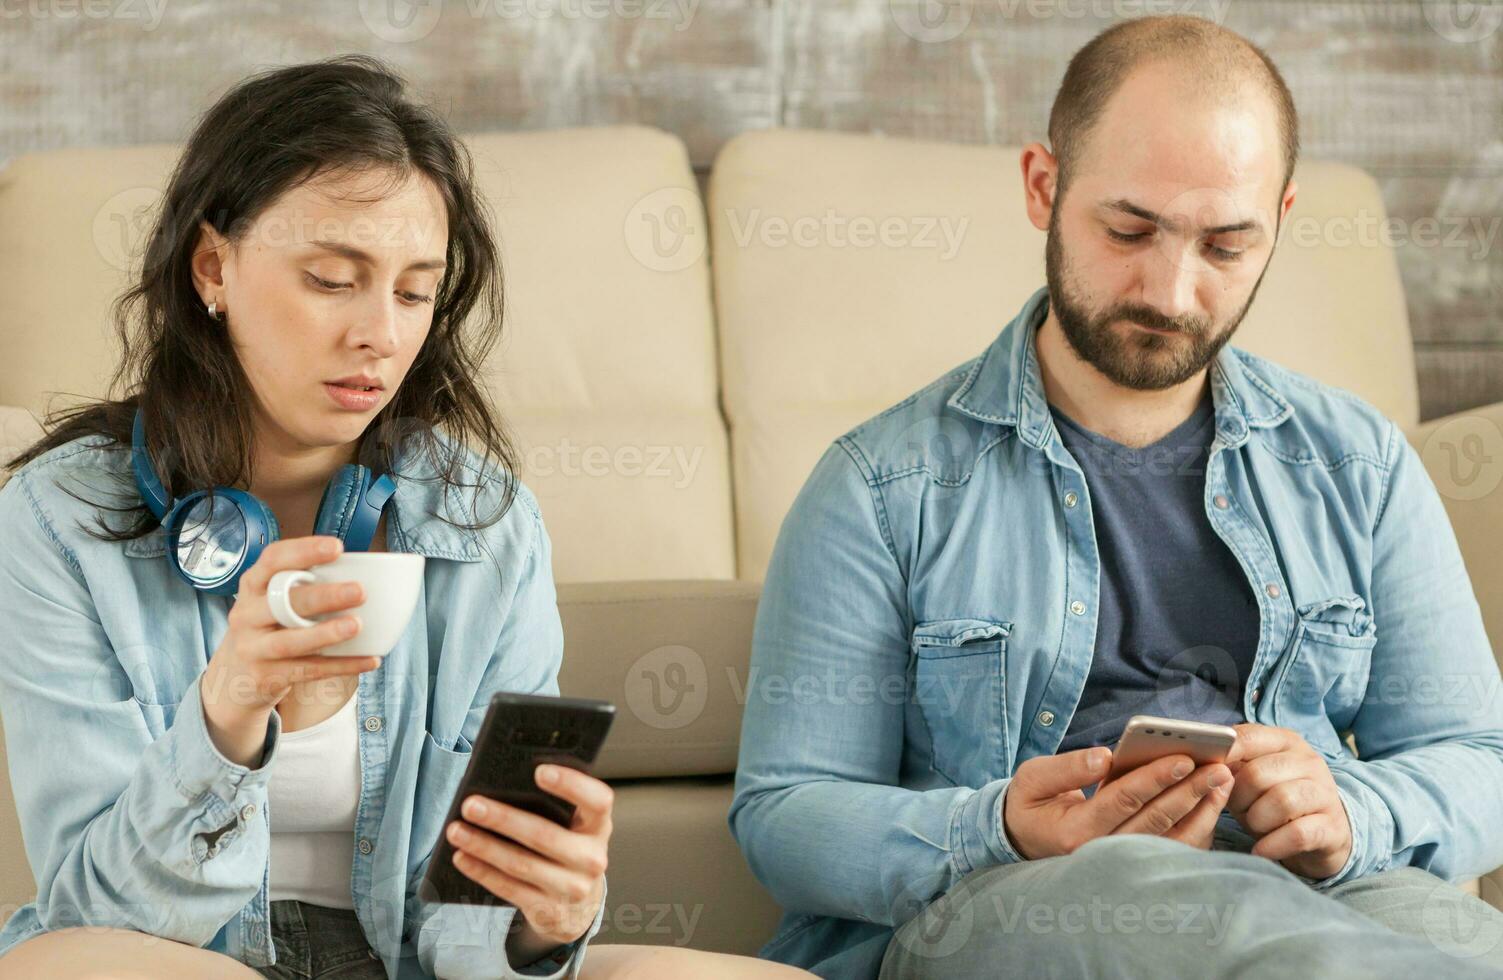 Couple checking social media on smartphones while relaxing on floor. photo